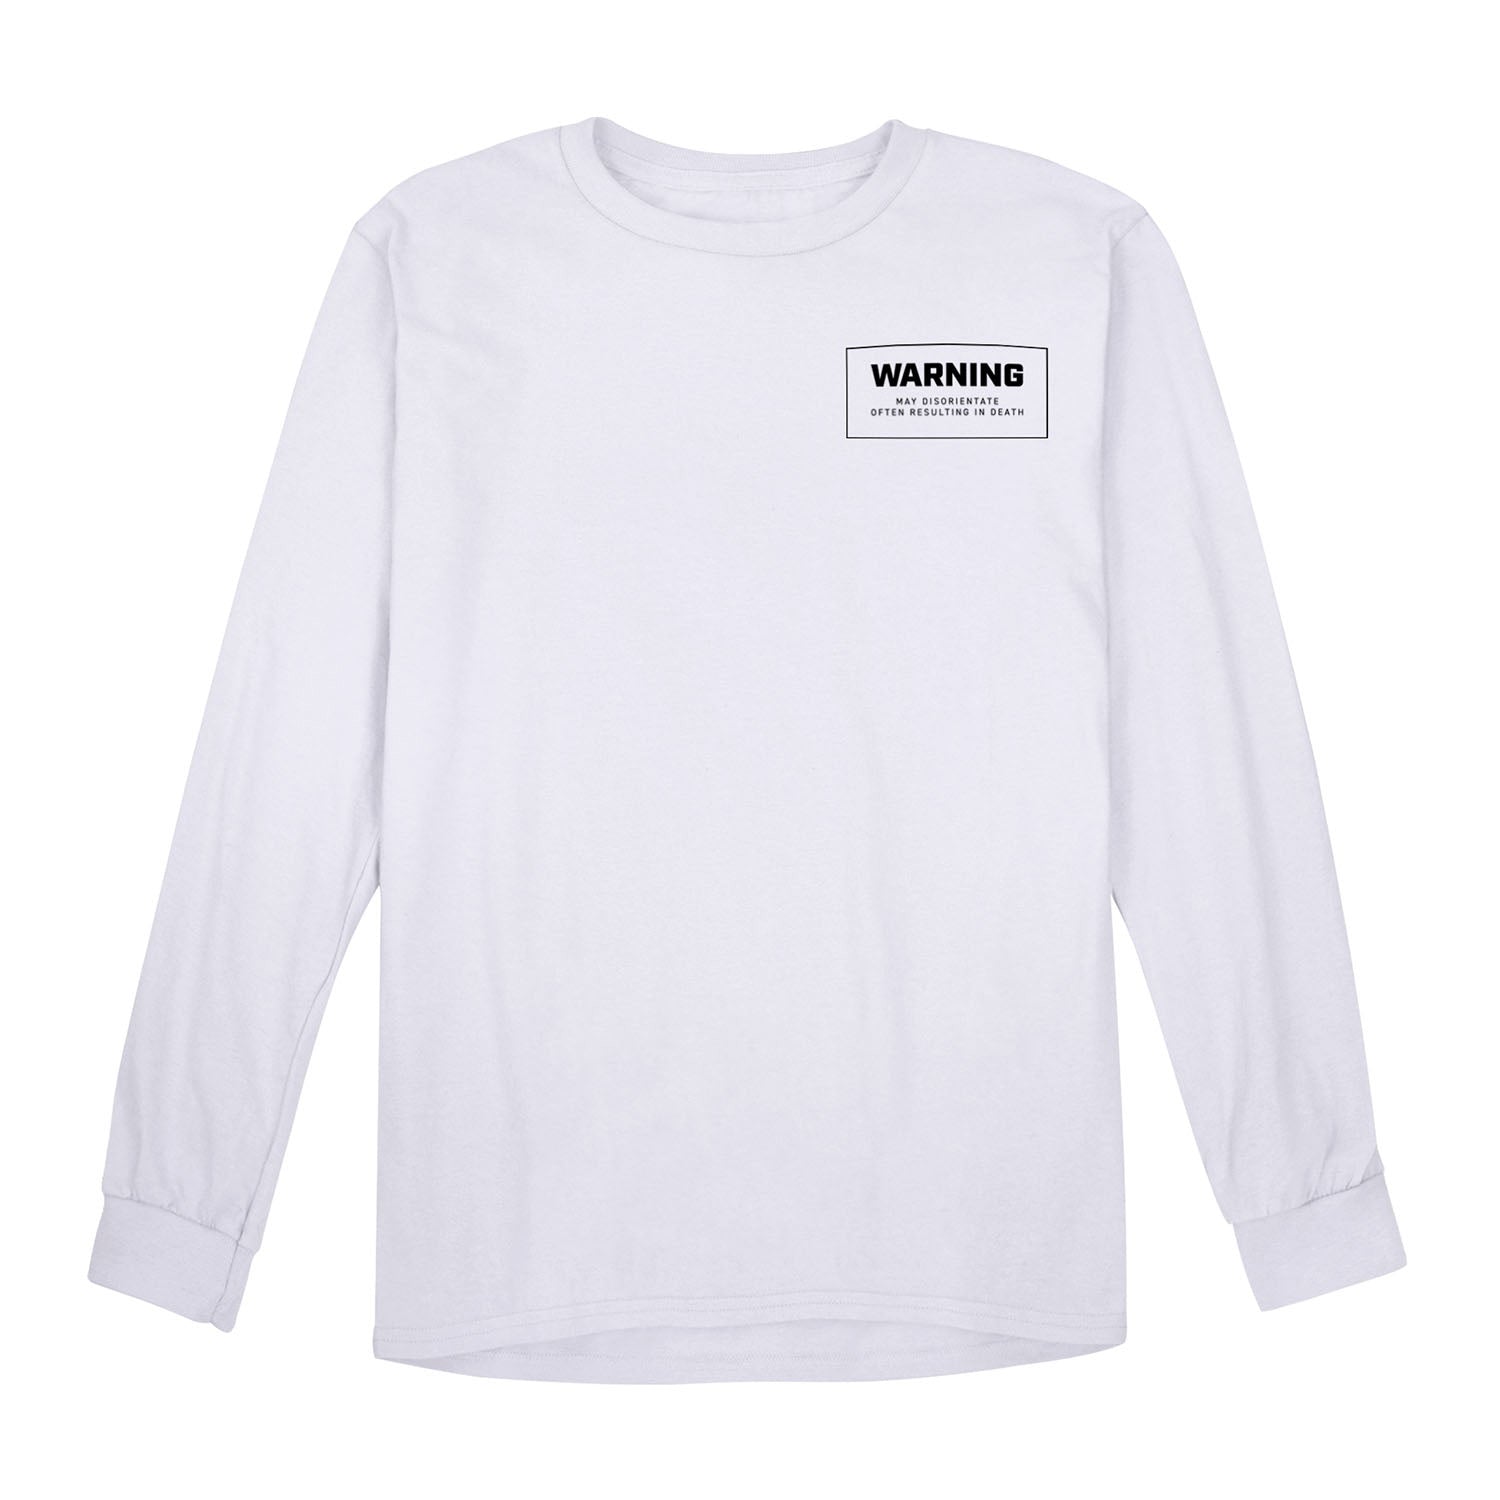 Call of Duty Stunned White Long Sleeve T-Shirt - Call of Duty Store